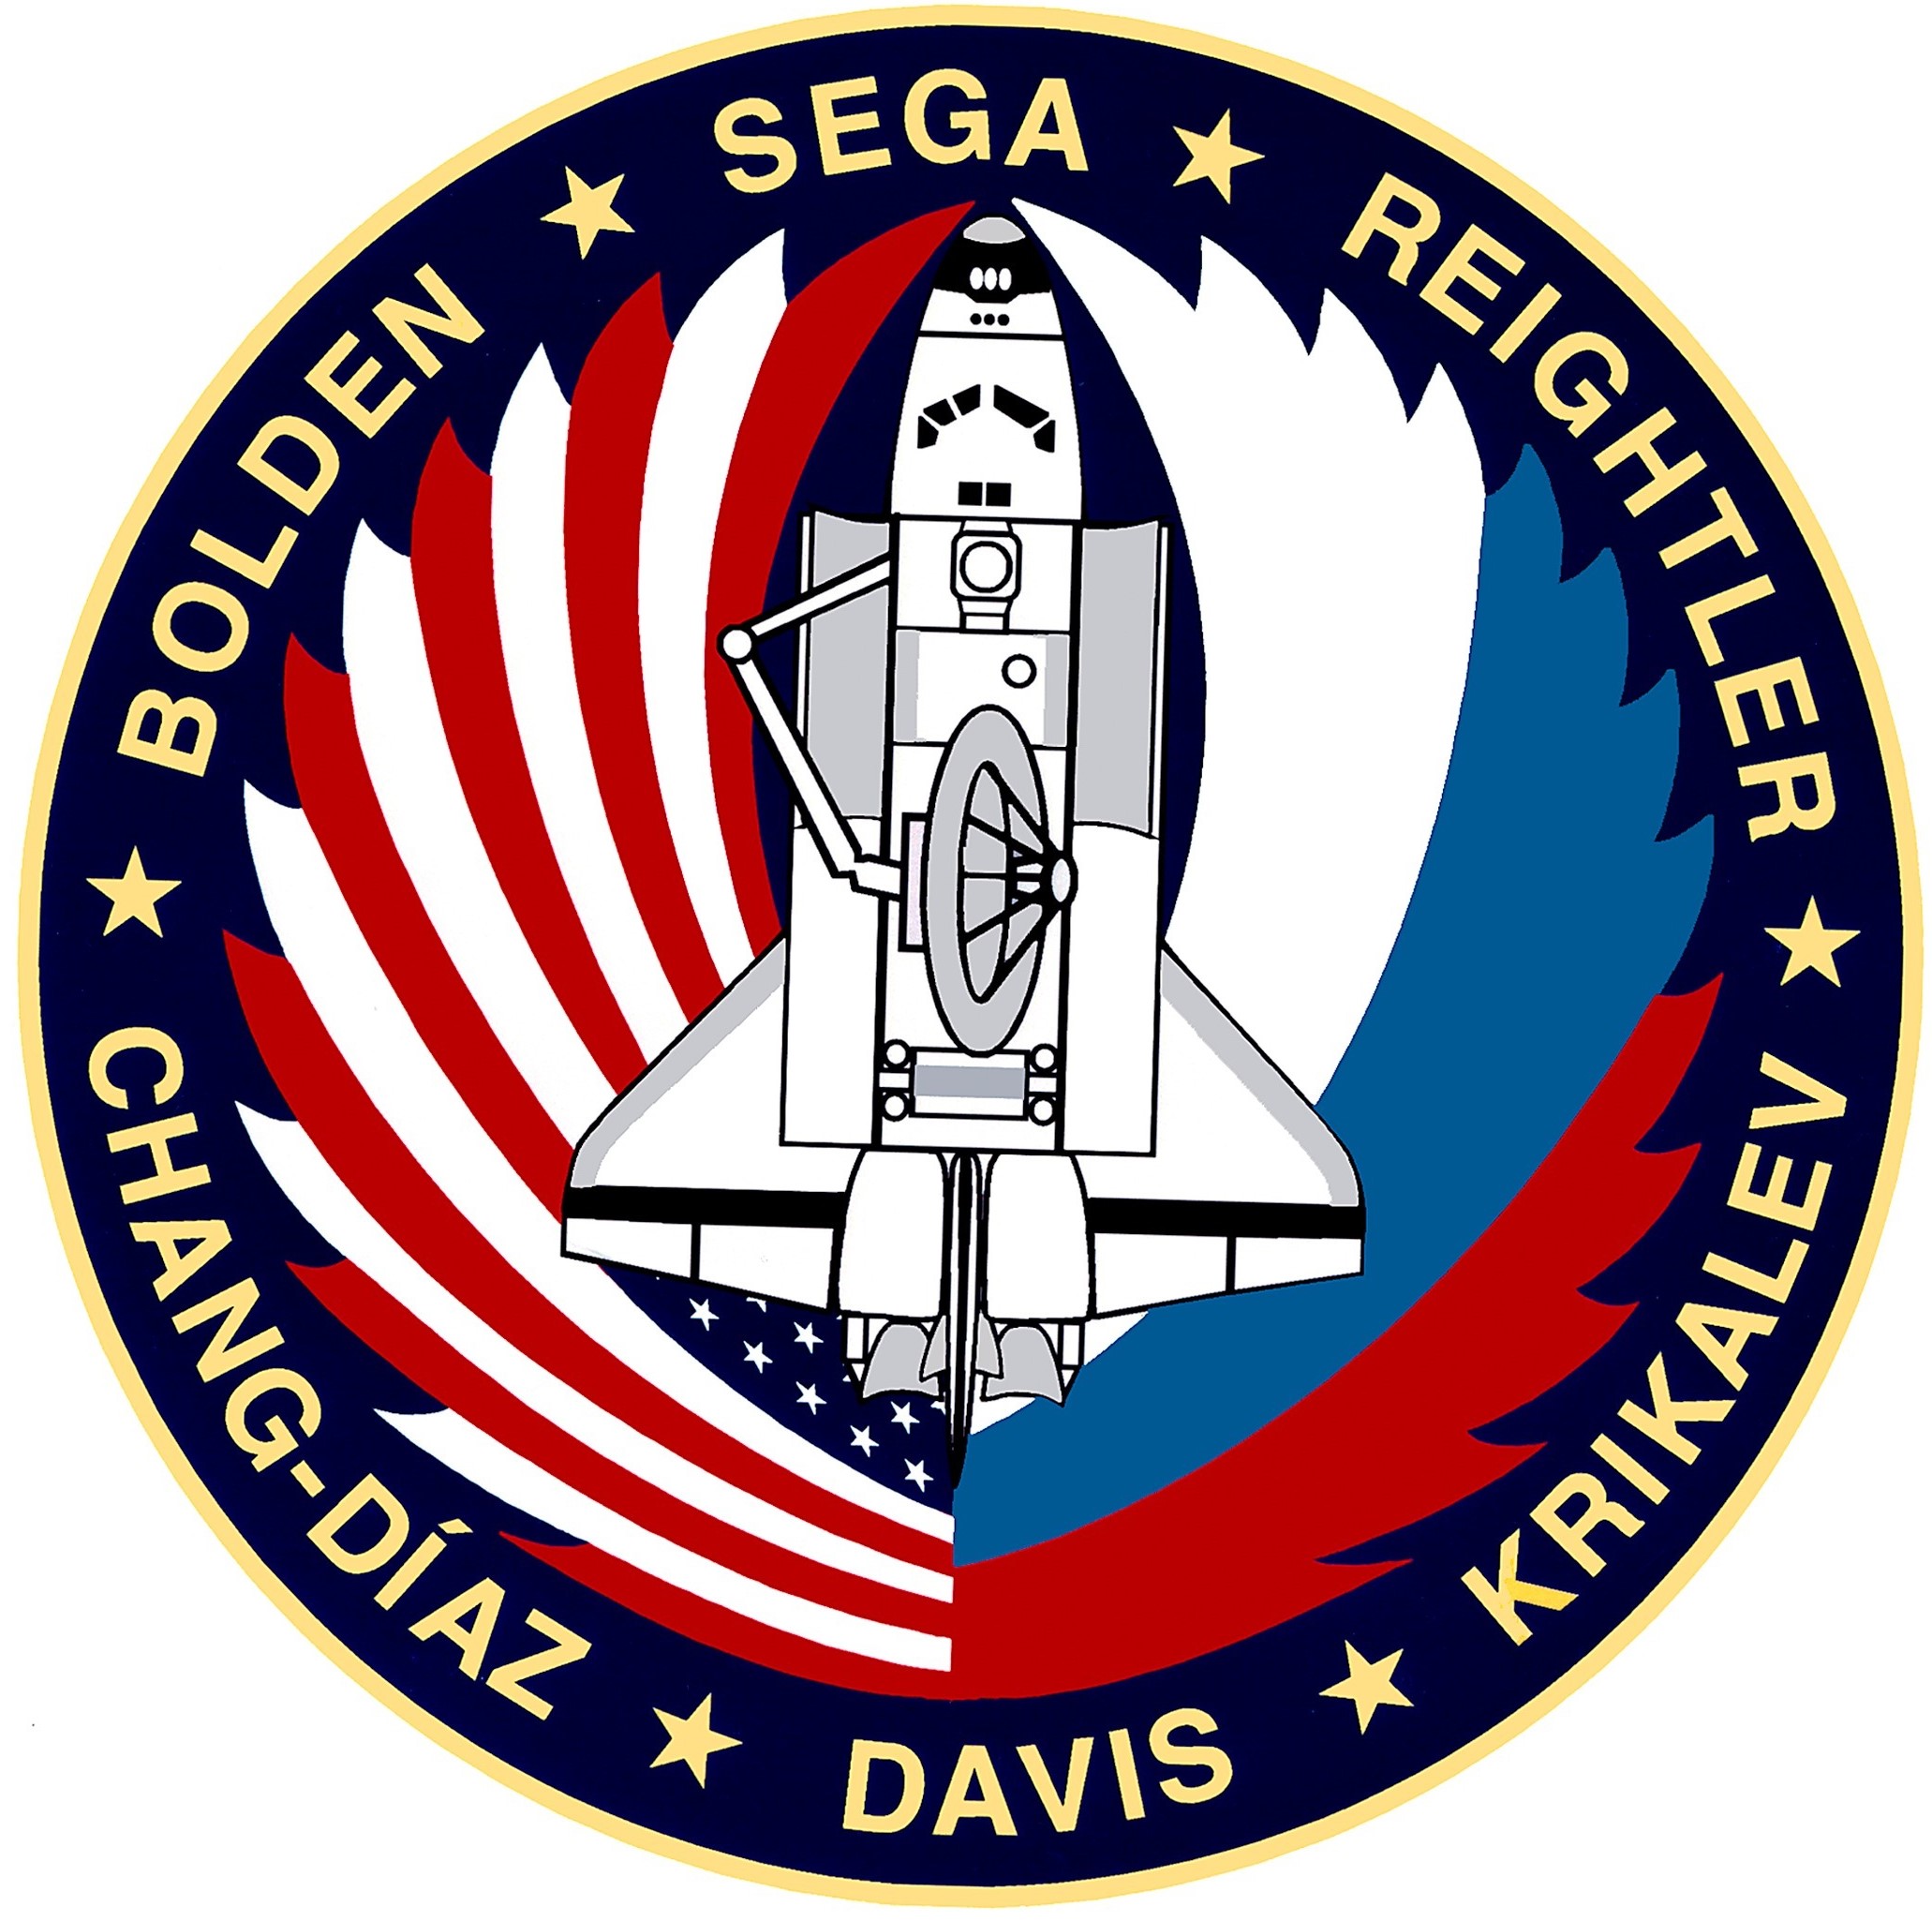 The STS-60 crew patch